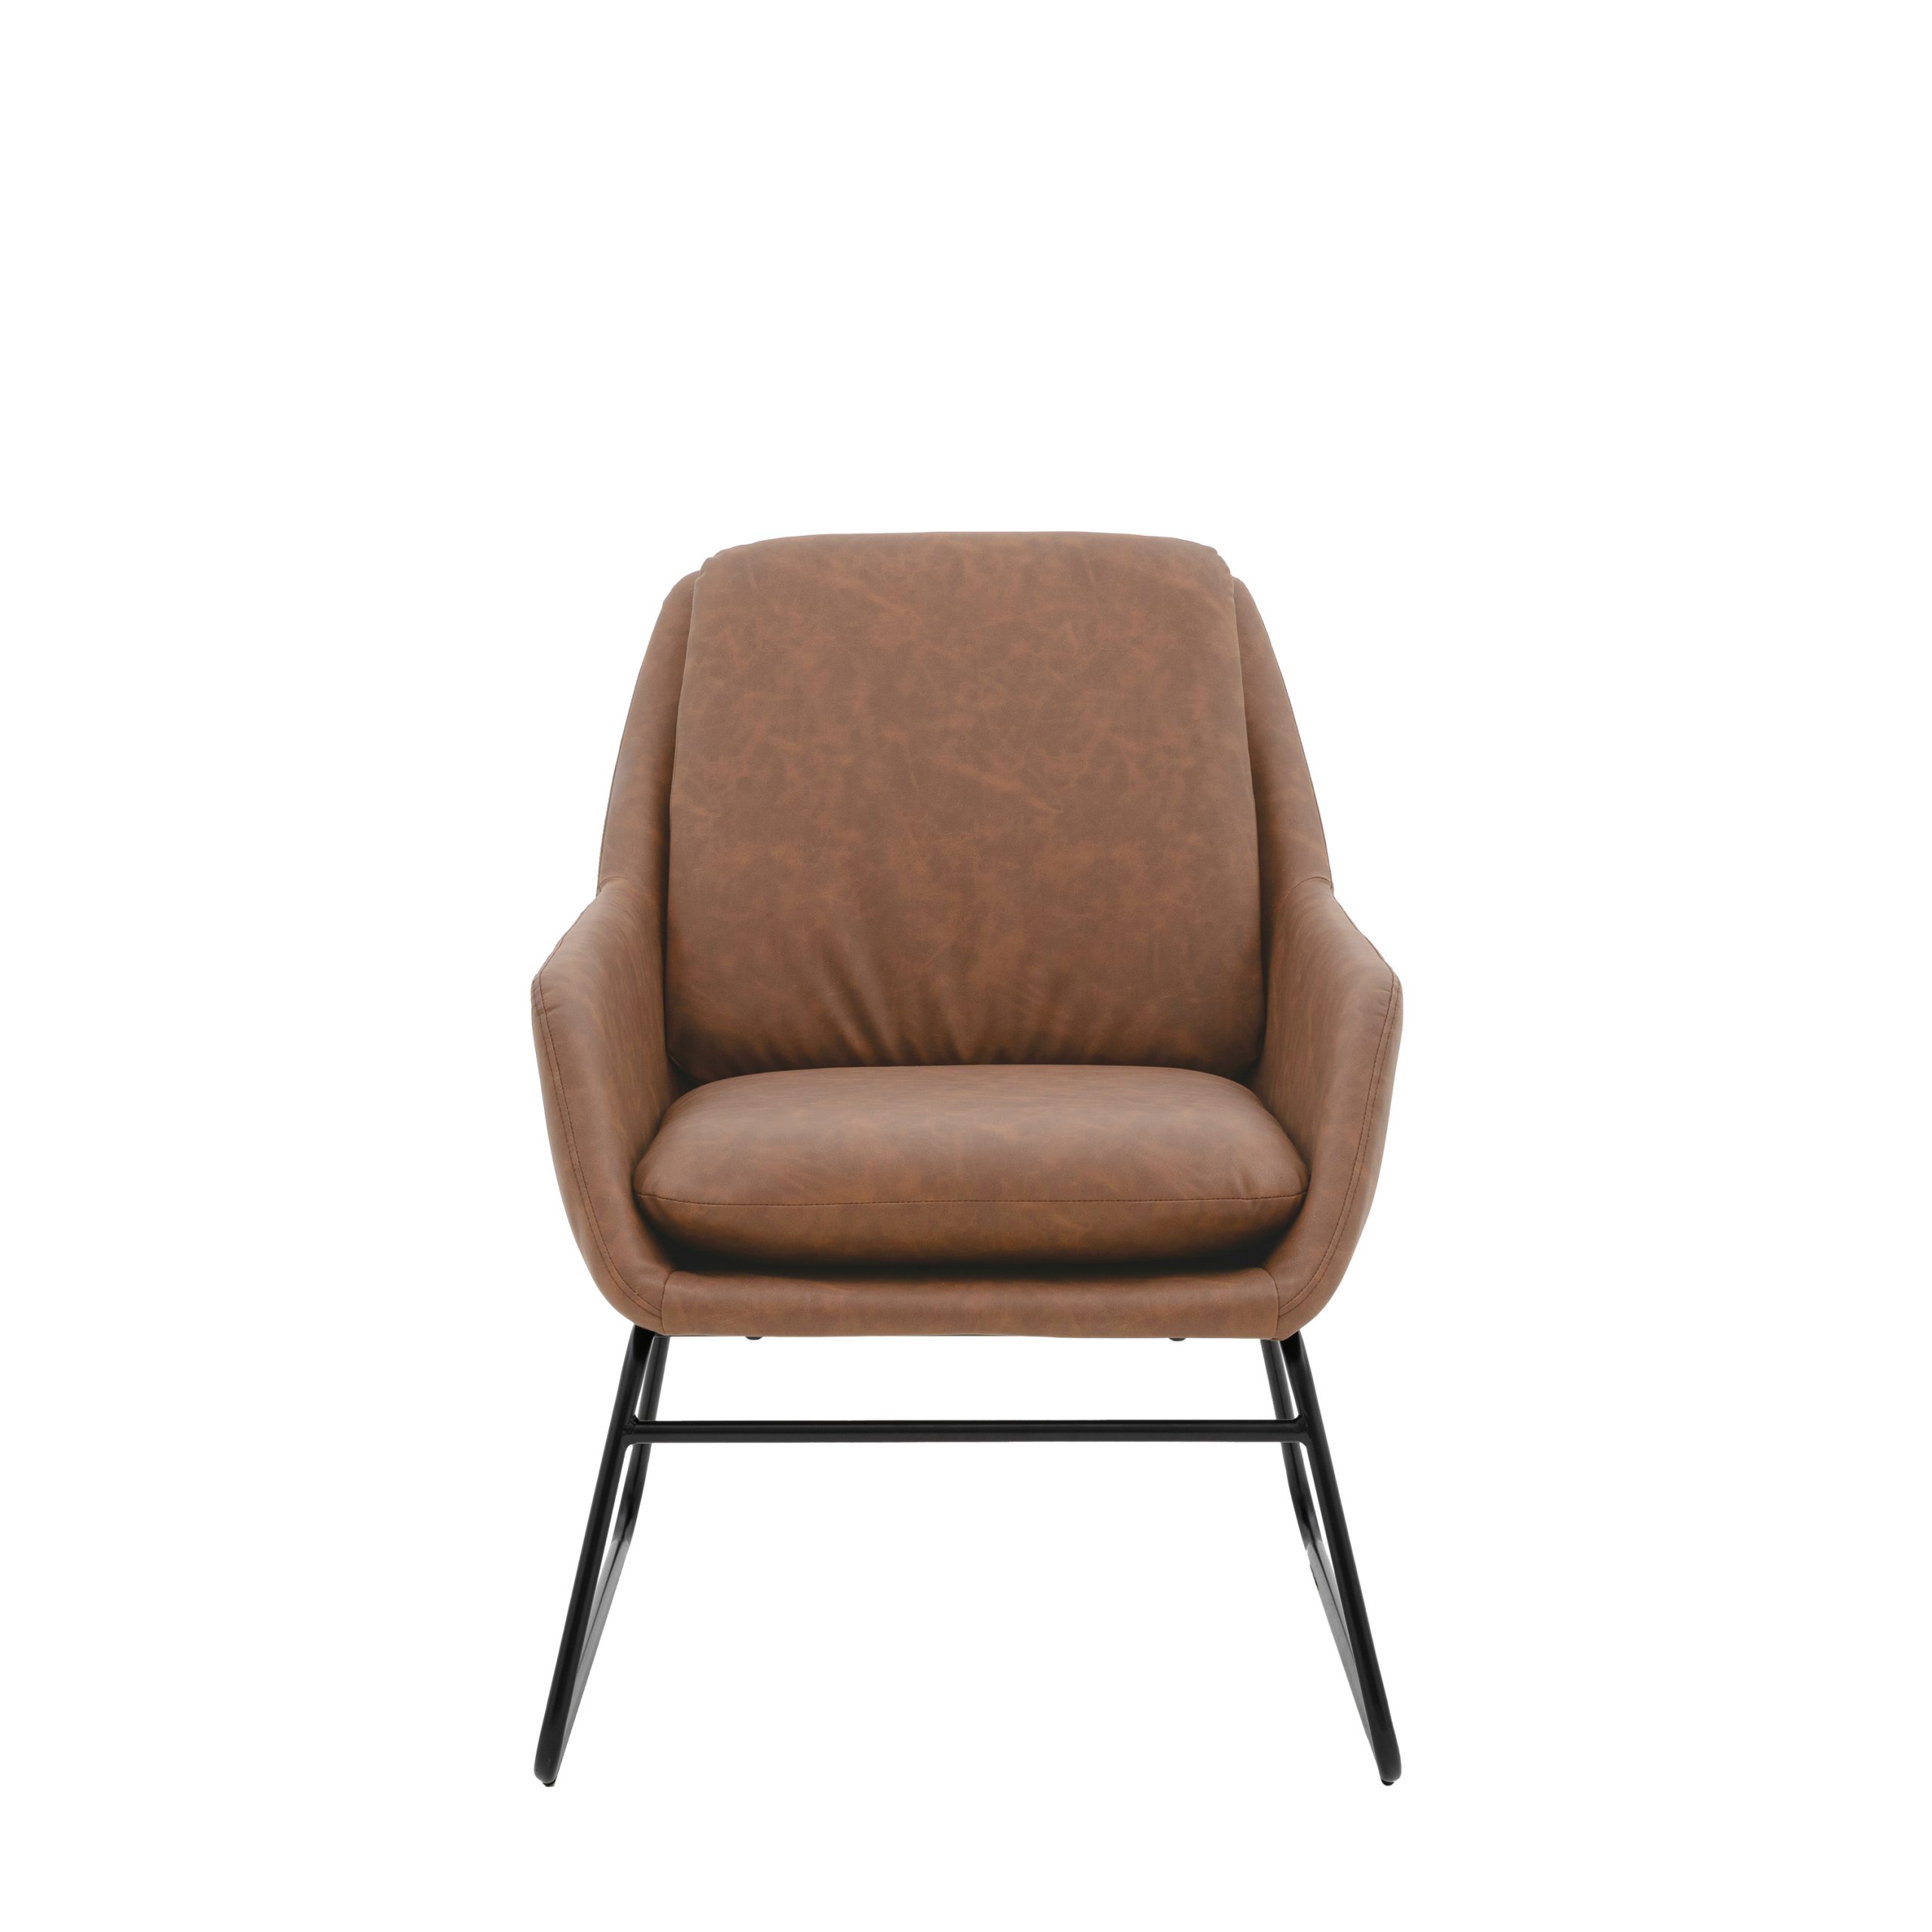 Gallery Direct Funton Chair Brown